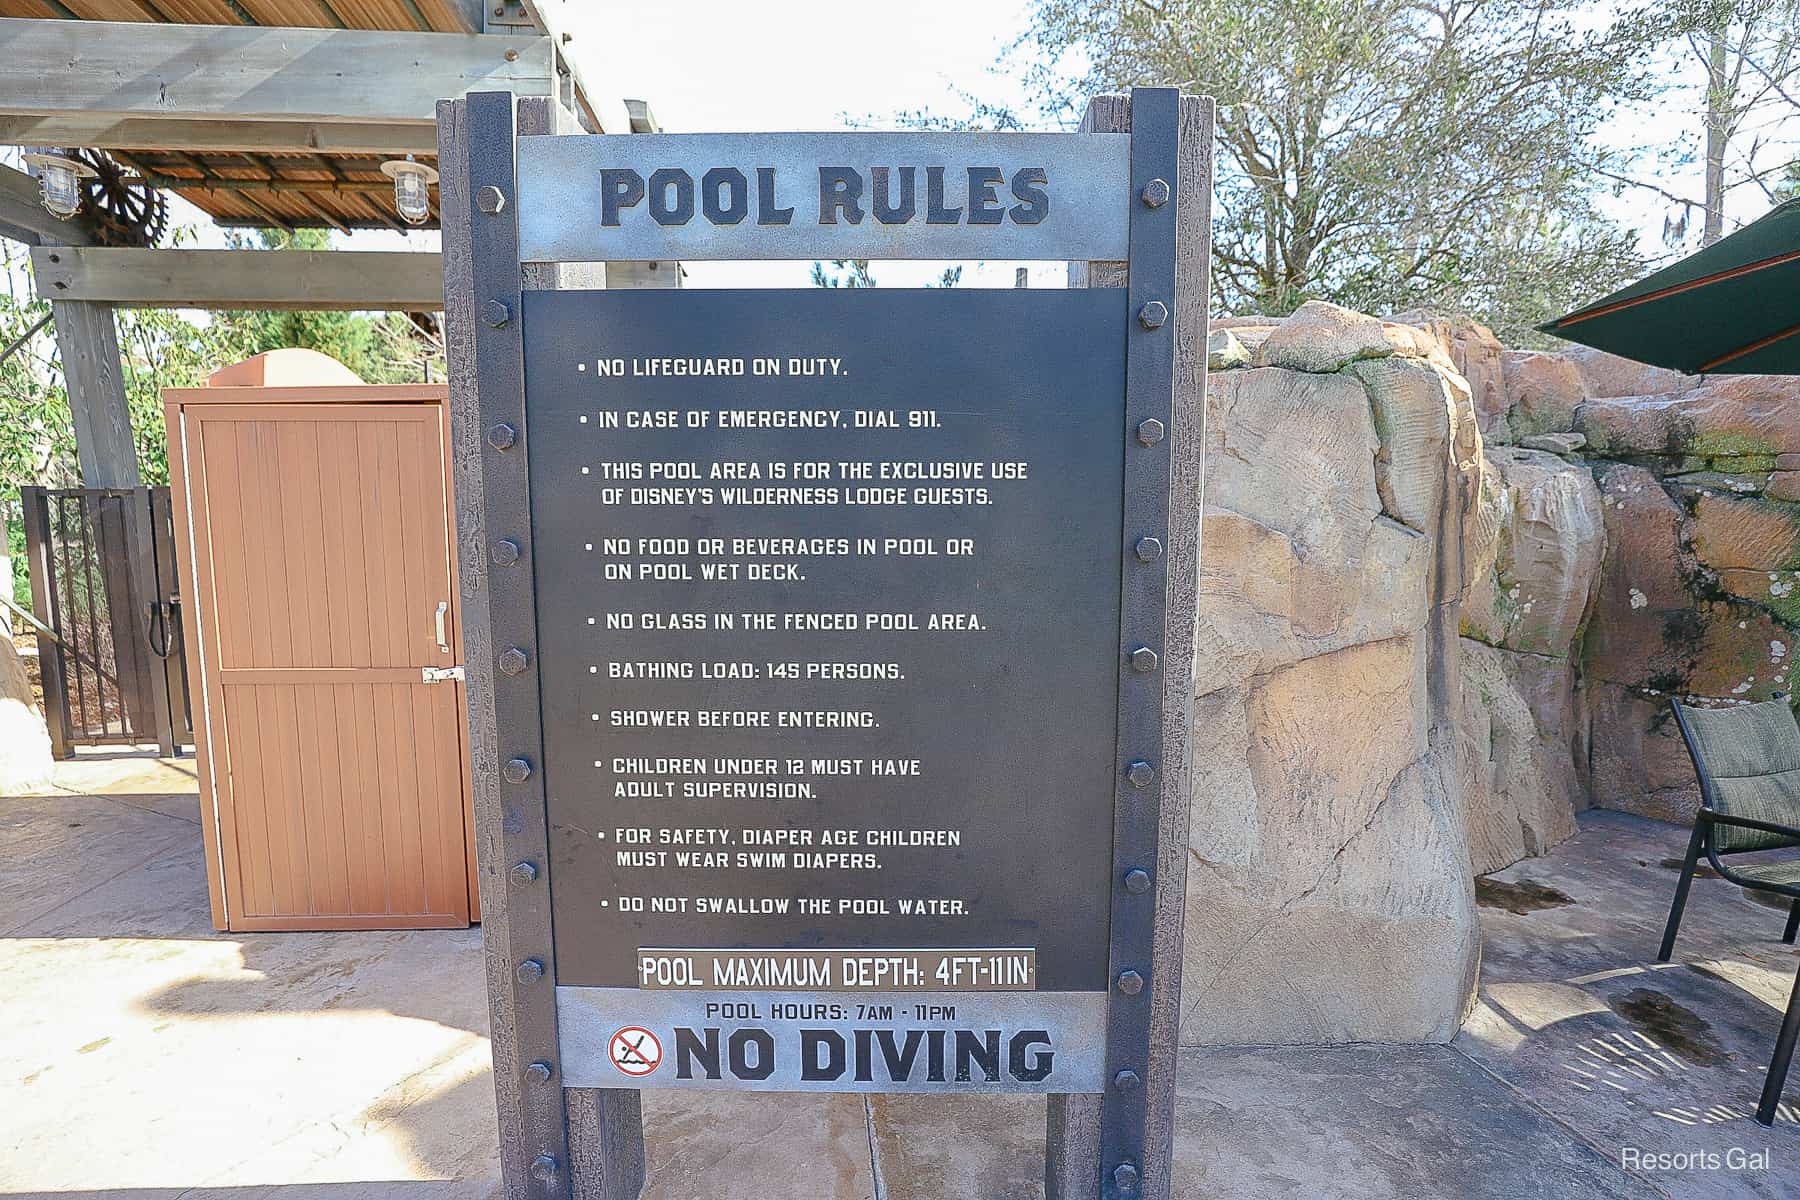 posted pool rules for the Boulder Ridge Cove Pool 